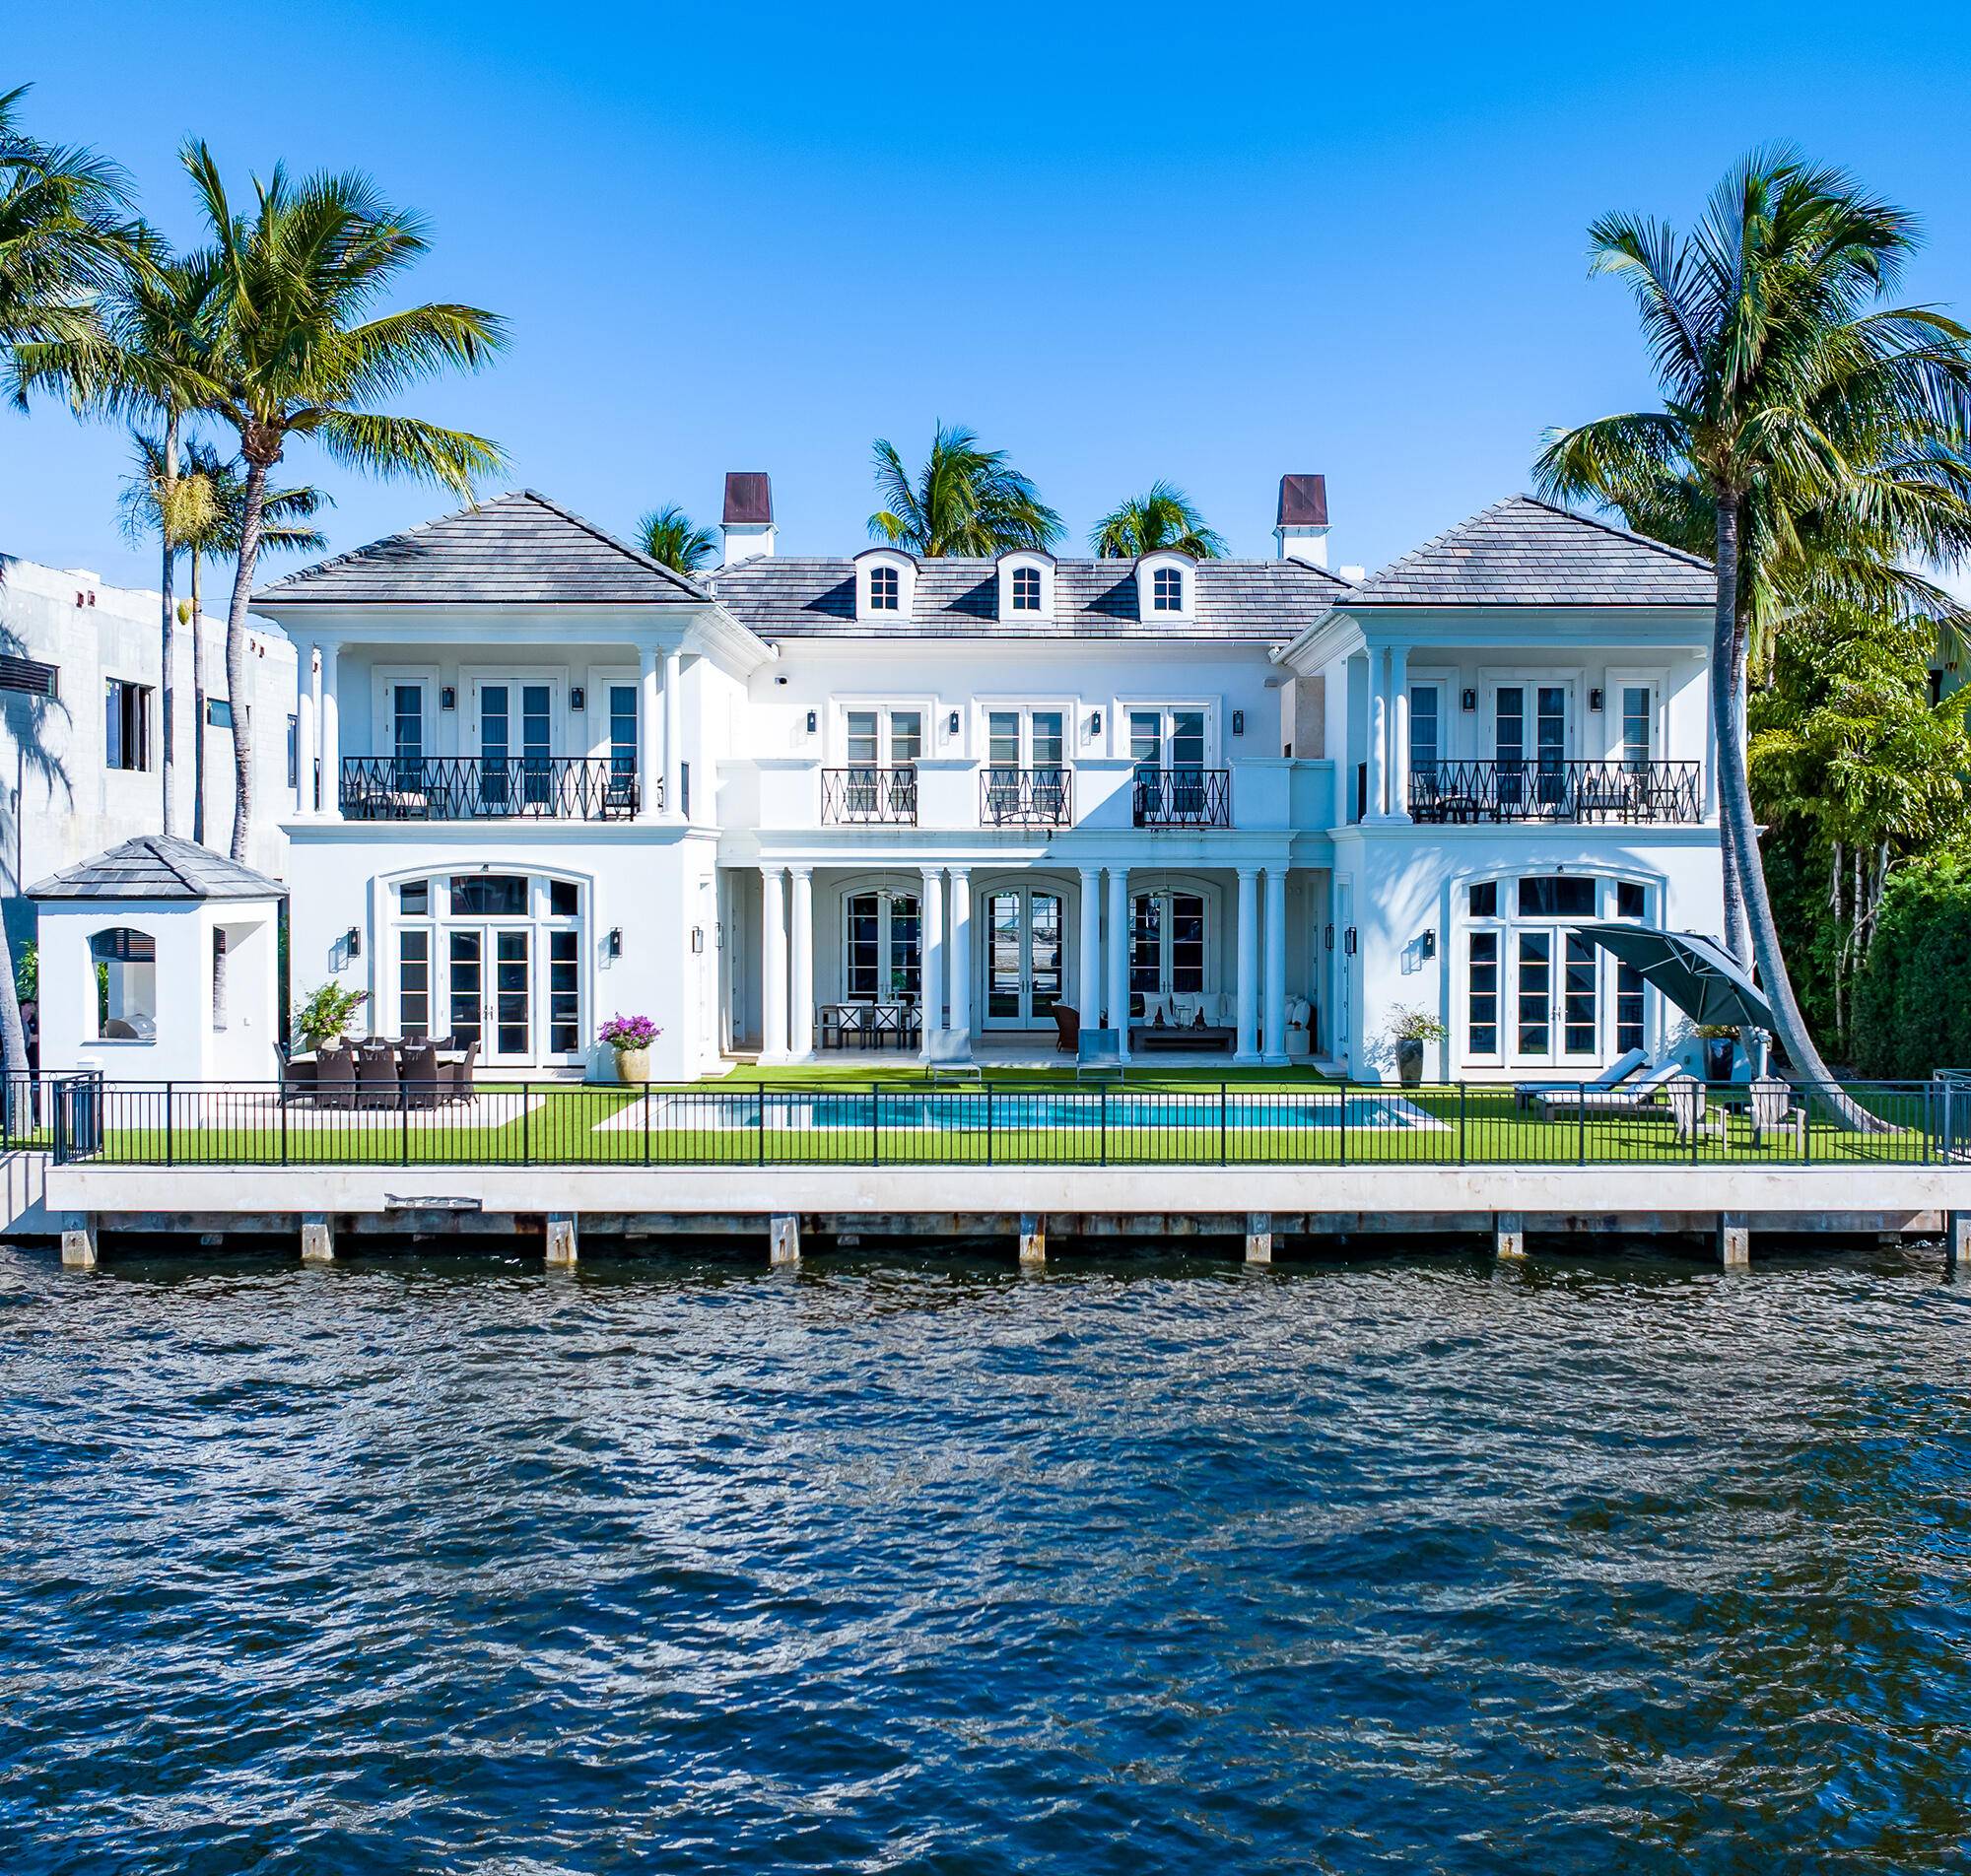 The art of modern living is expressed with eloquent aplomb in this showplace on the Intracoastal Waterway in The Estates, historic Old Boca Raton's prestigious beachside enclave.